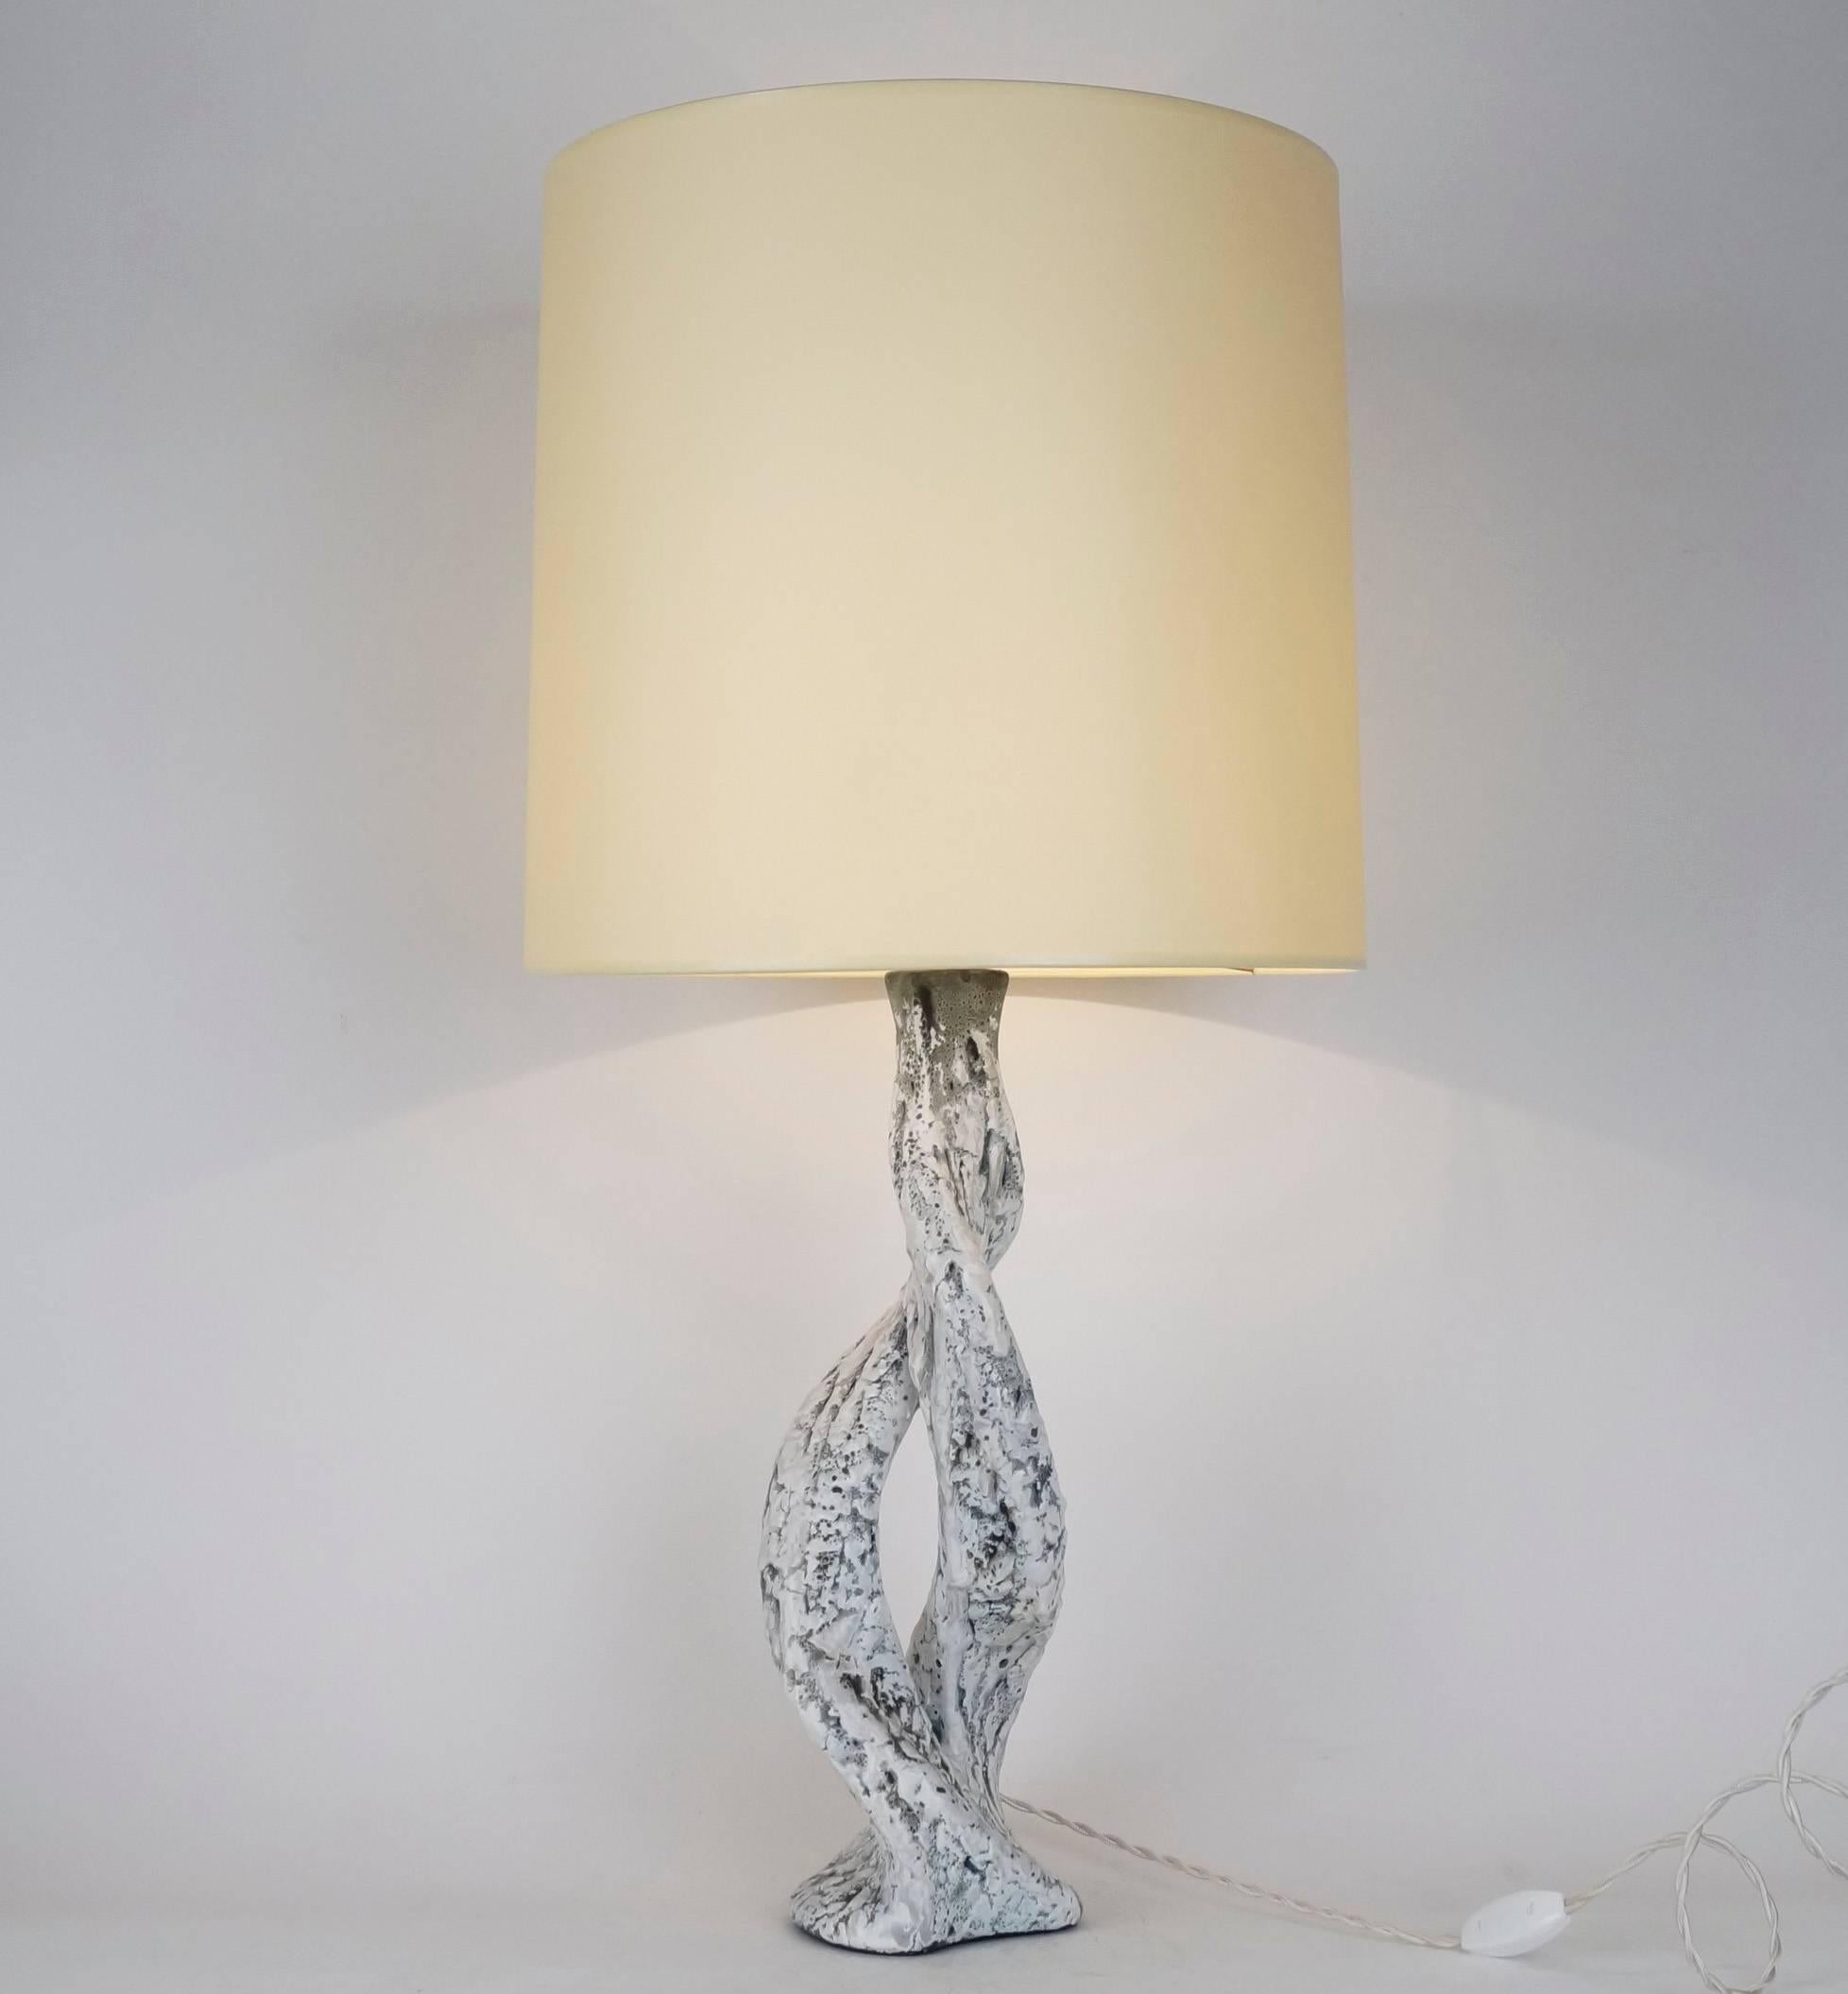 Enamelled ceramic table lamp by Louis Giraud, Vallauris.
Signed on the back.
Custom-made fabric lampshades.
Rewired with twisted silk cord.
US standard plug on request.

Measures: Ceramic: 41 cm-16.1in.
Height with lampshade: 75 cm-29.5 in.